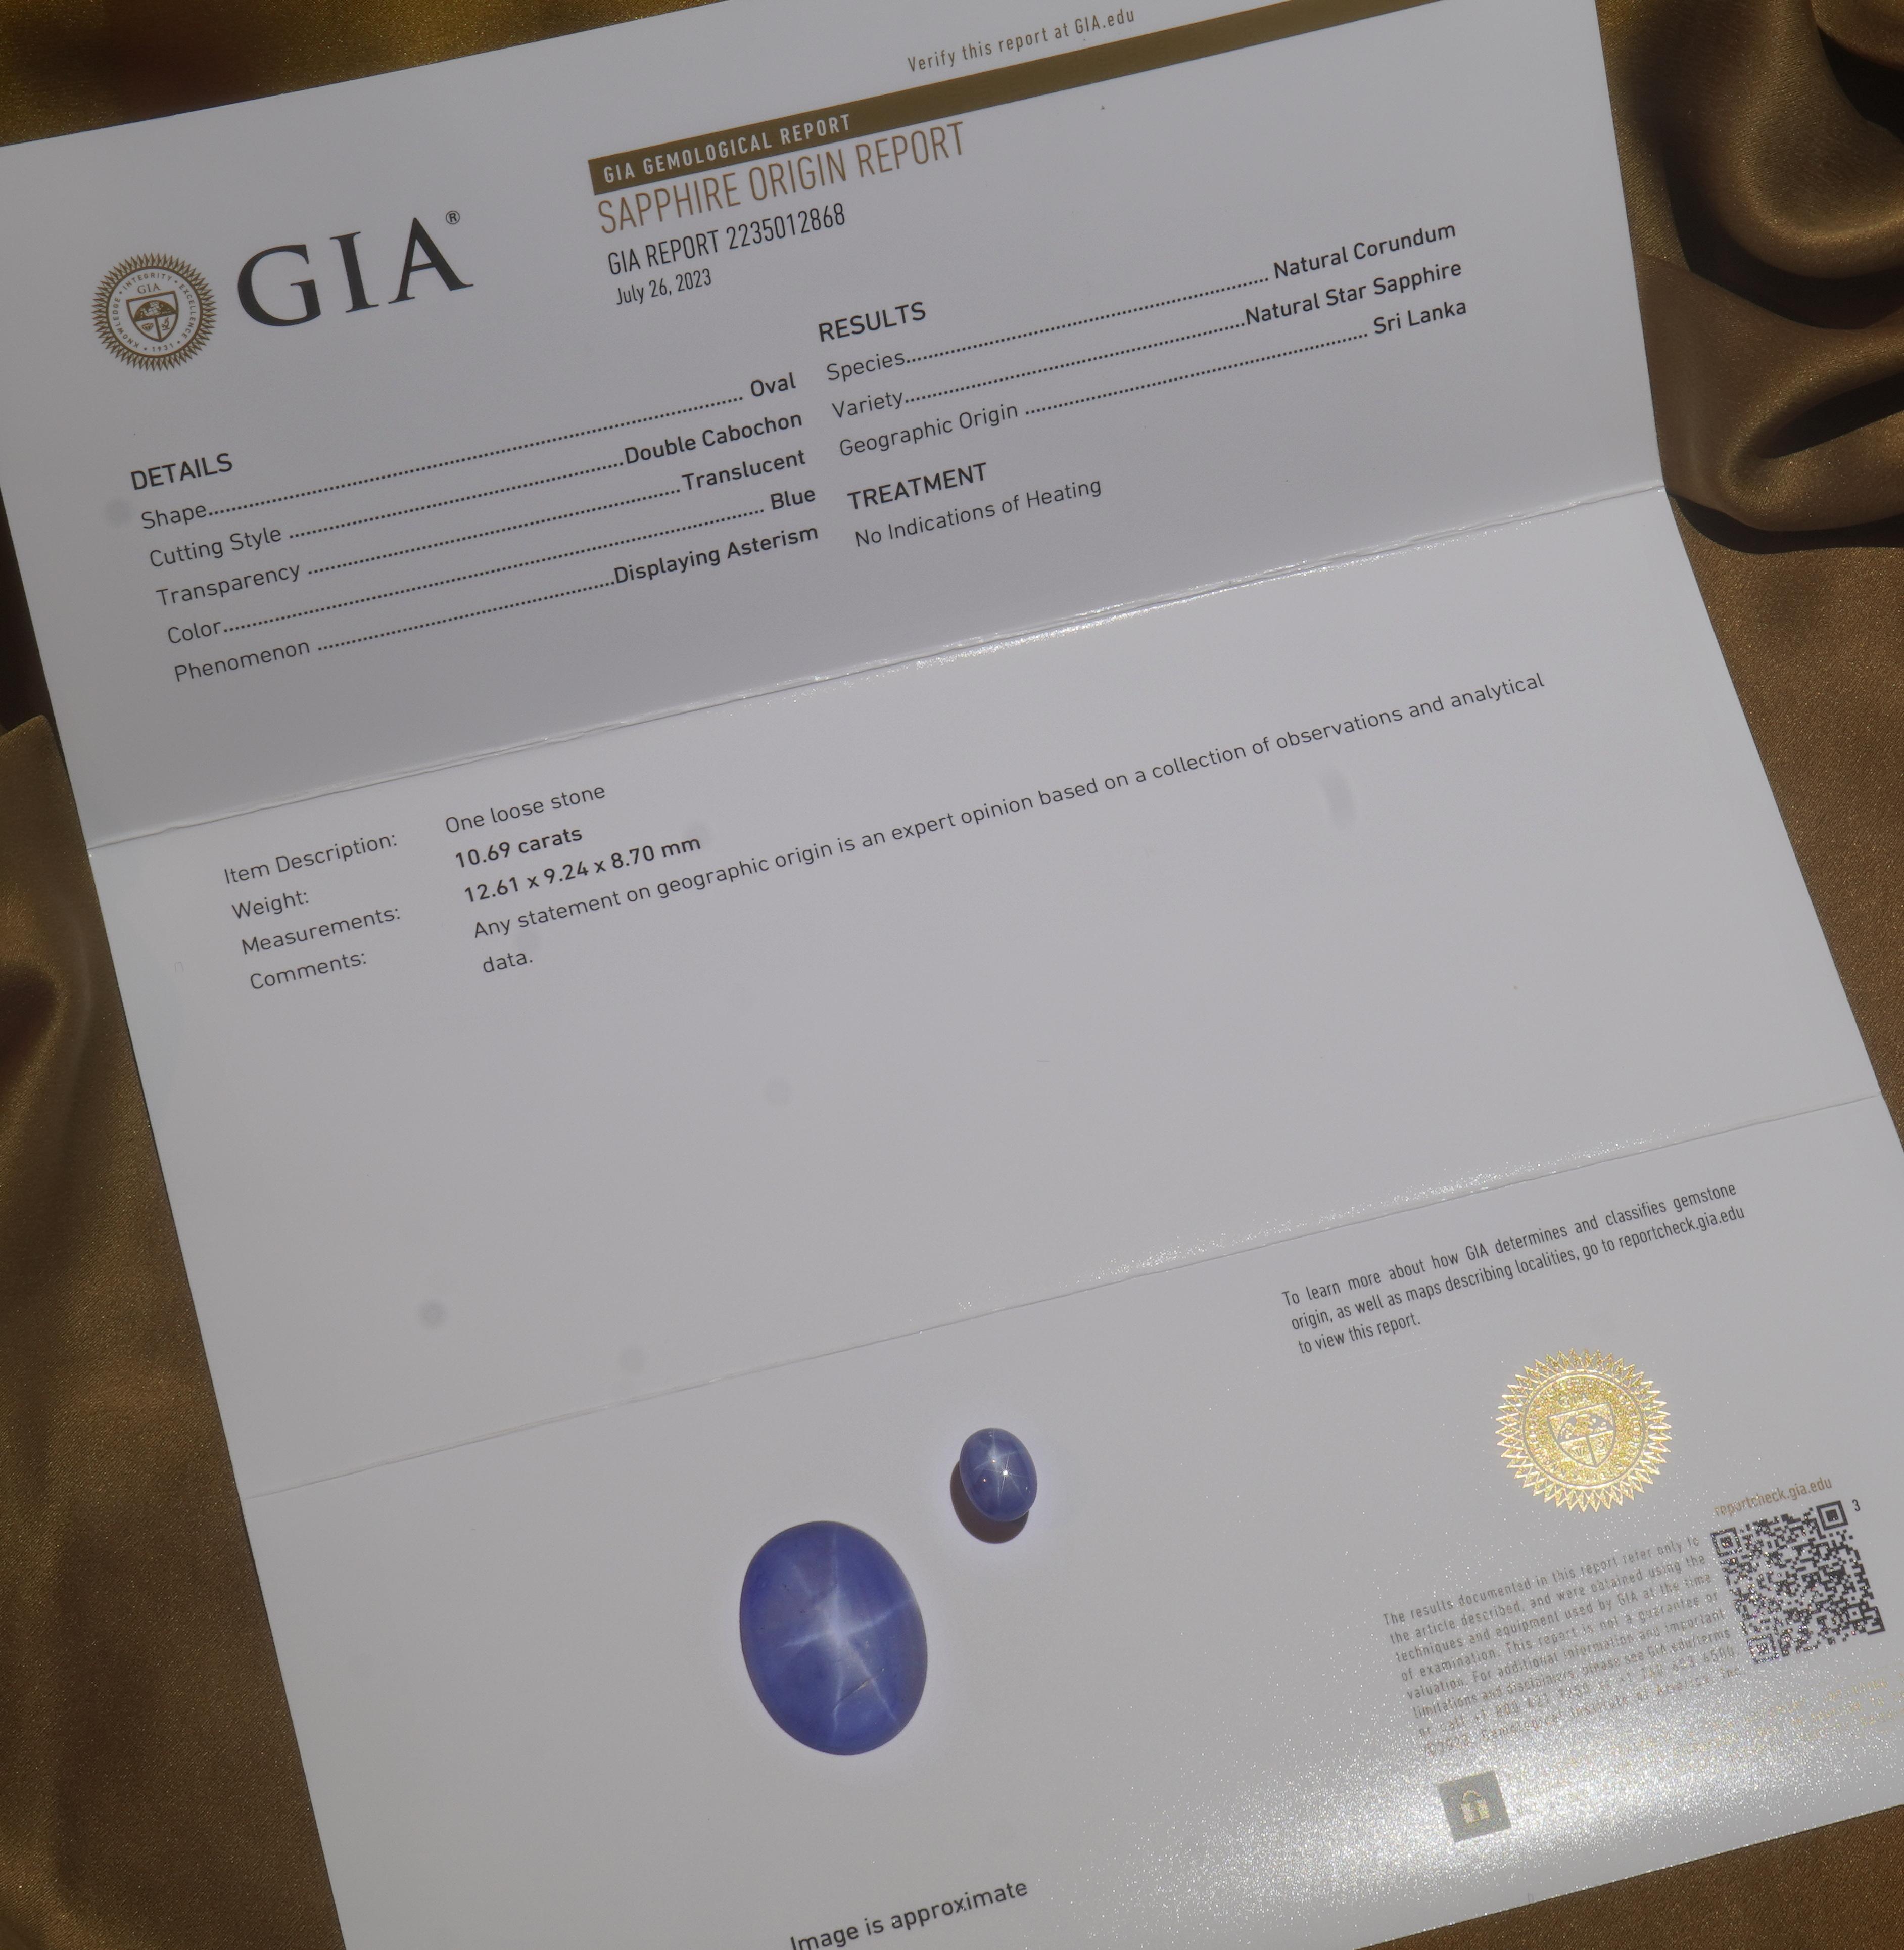 Old South Jewels proudly presents...VINTAGE LUXURY... GIA CERTIFIED 10.69 CARAT UNHEATED STAR SAPPHIRE. 10.69 CARAT TRANSPARENT BLUE GIA CERTIFIED RARE NO HEAT NATURAL CEYLON SAPPHIRE.  

Velvety Soft Blue Star Sapphire...What an Impressive Huge